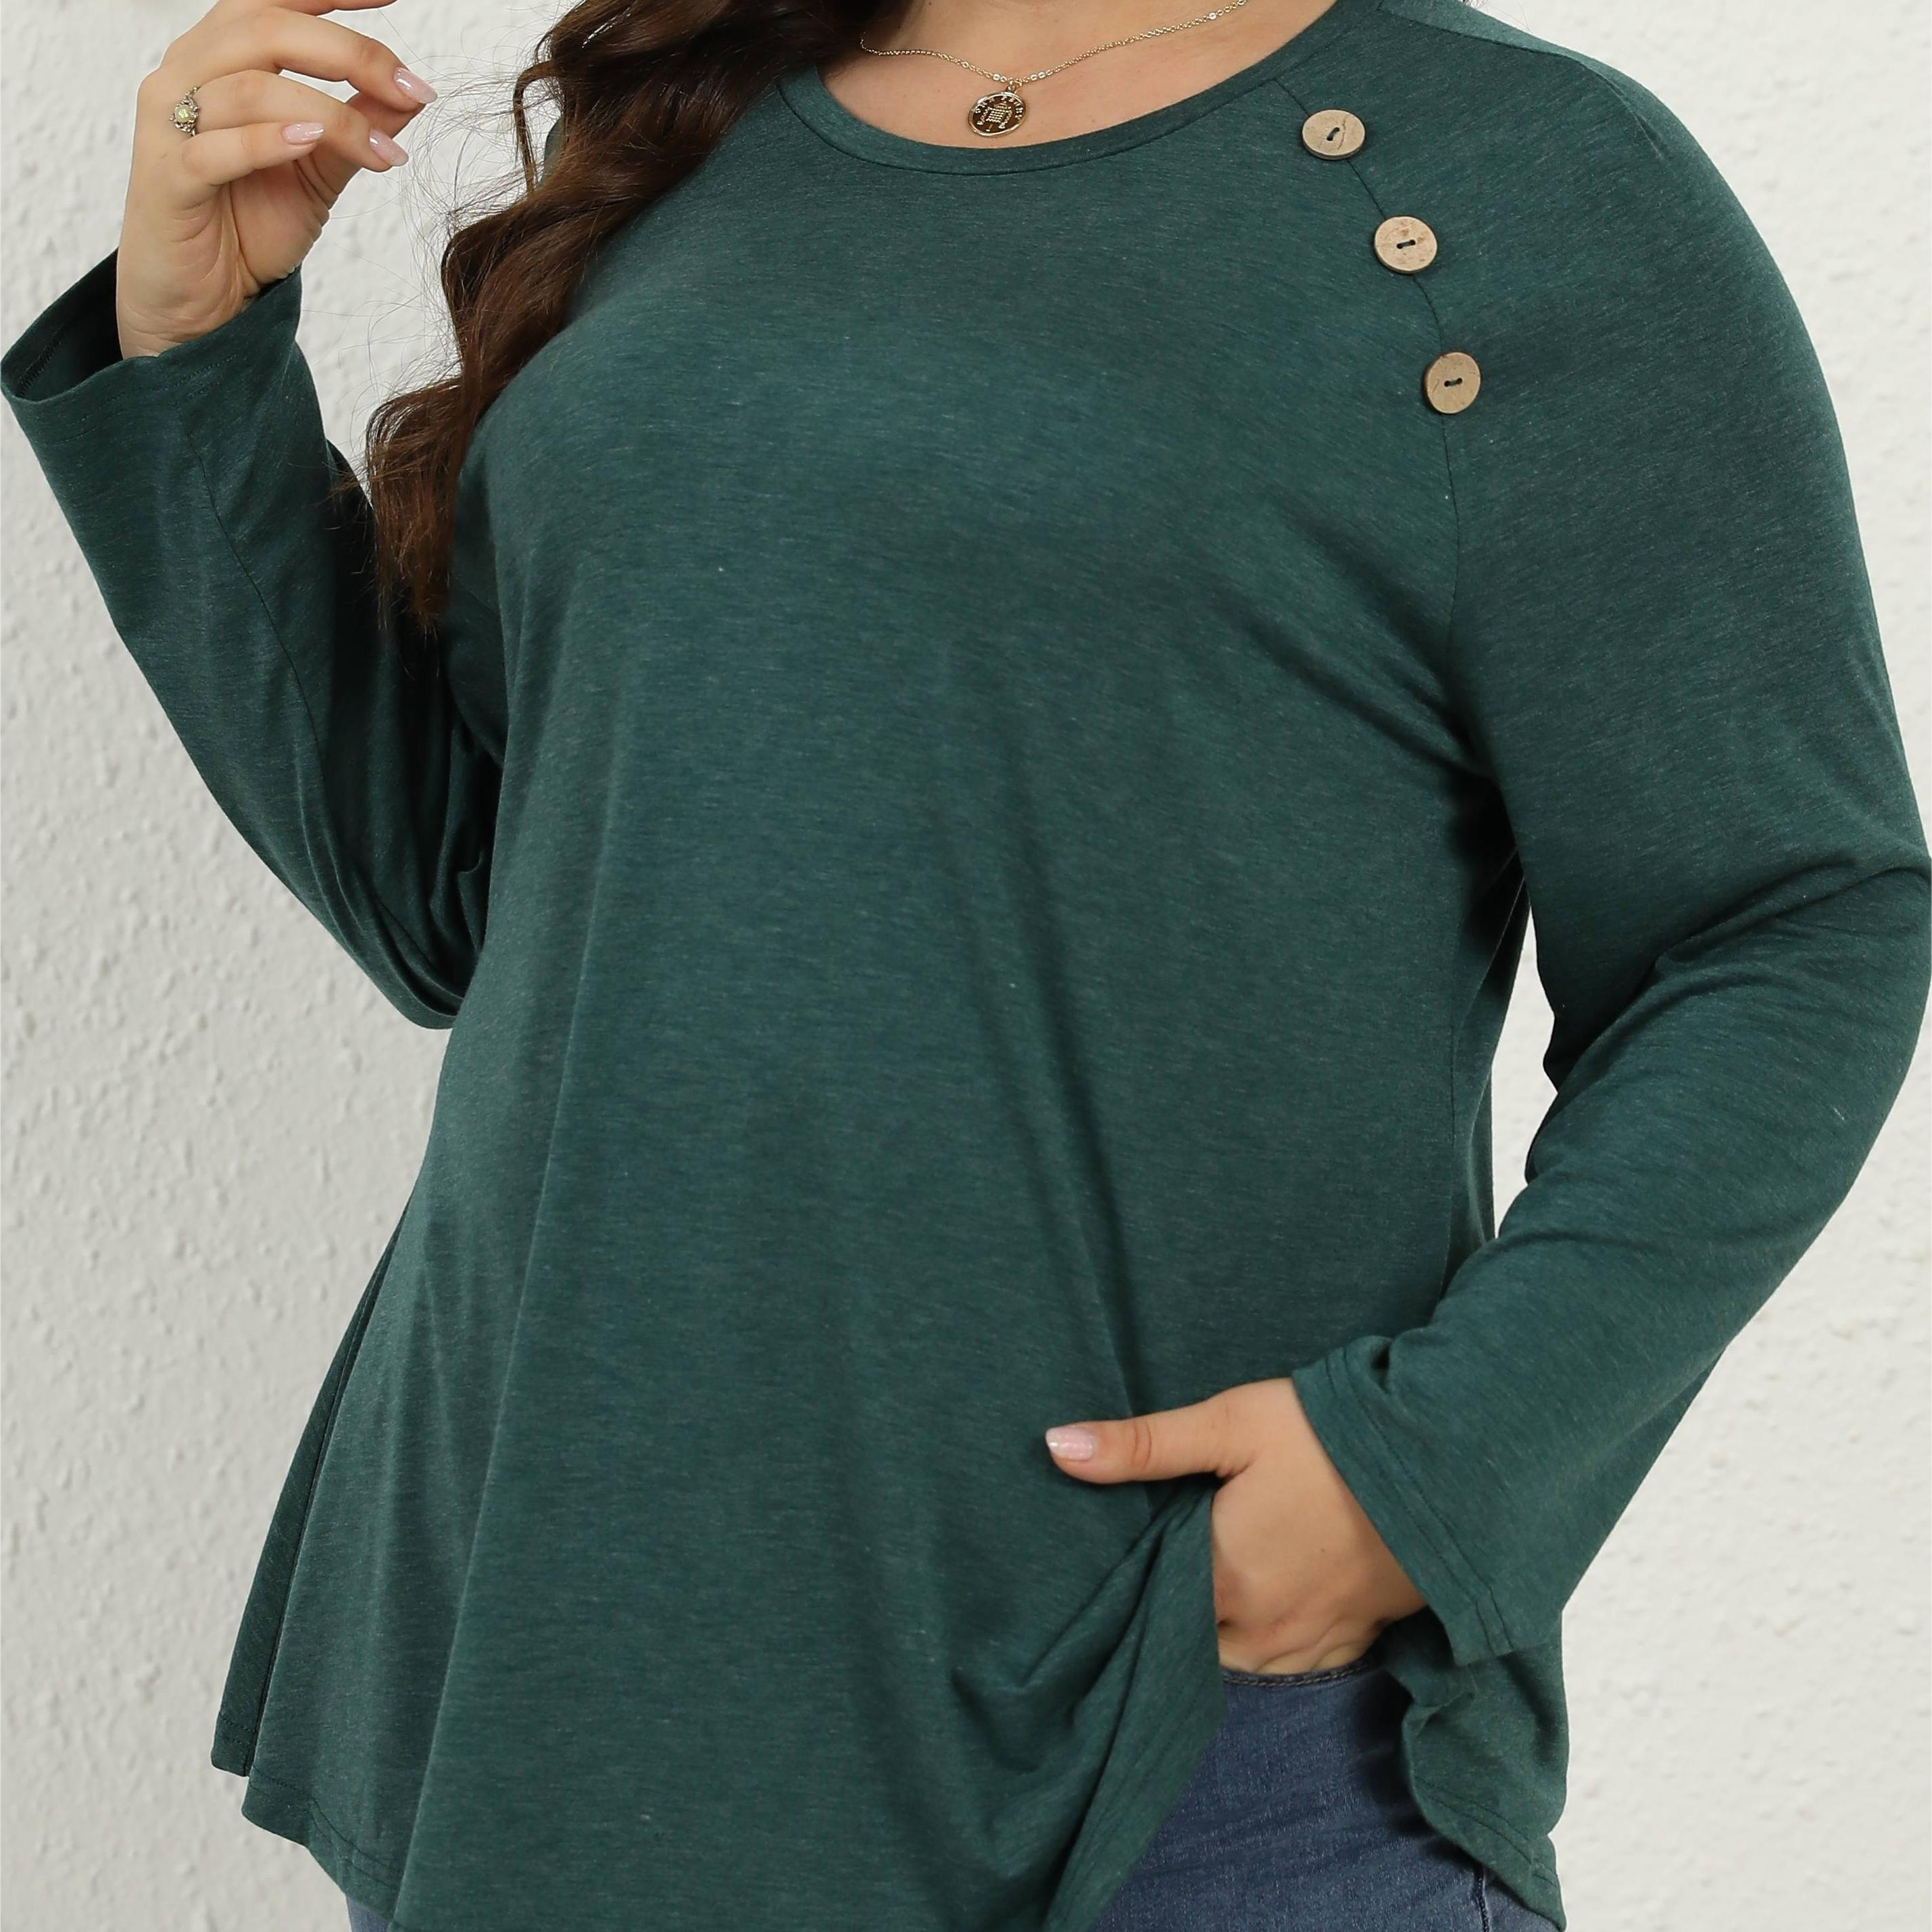 

Plus Size Casual T-shirt, Women's Plus Solid Button Decor Long Sleeve Round Neck Medium Stretch Top